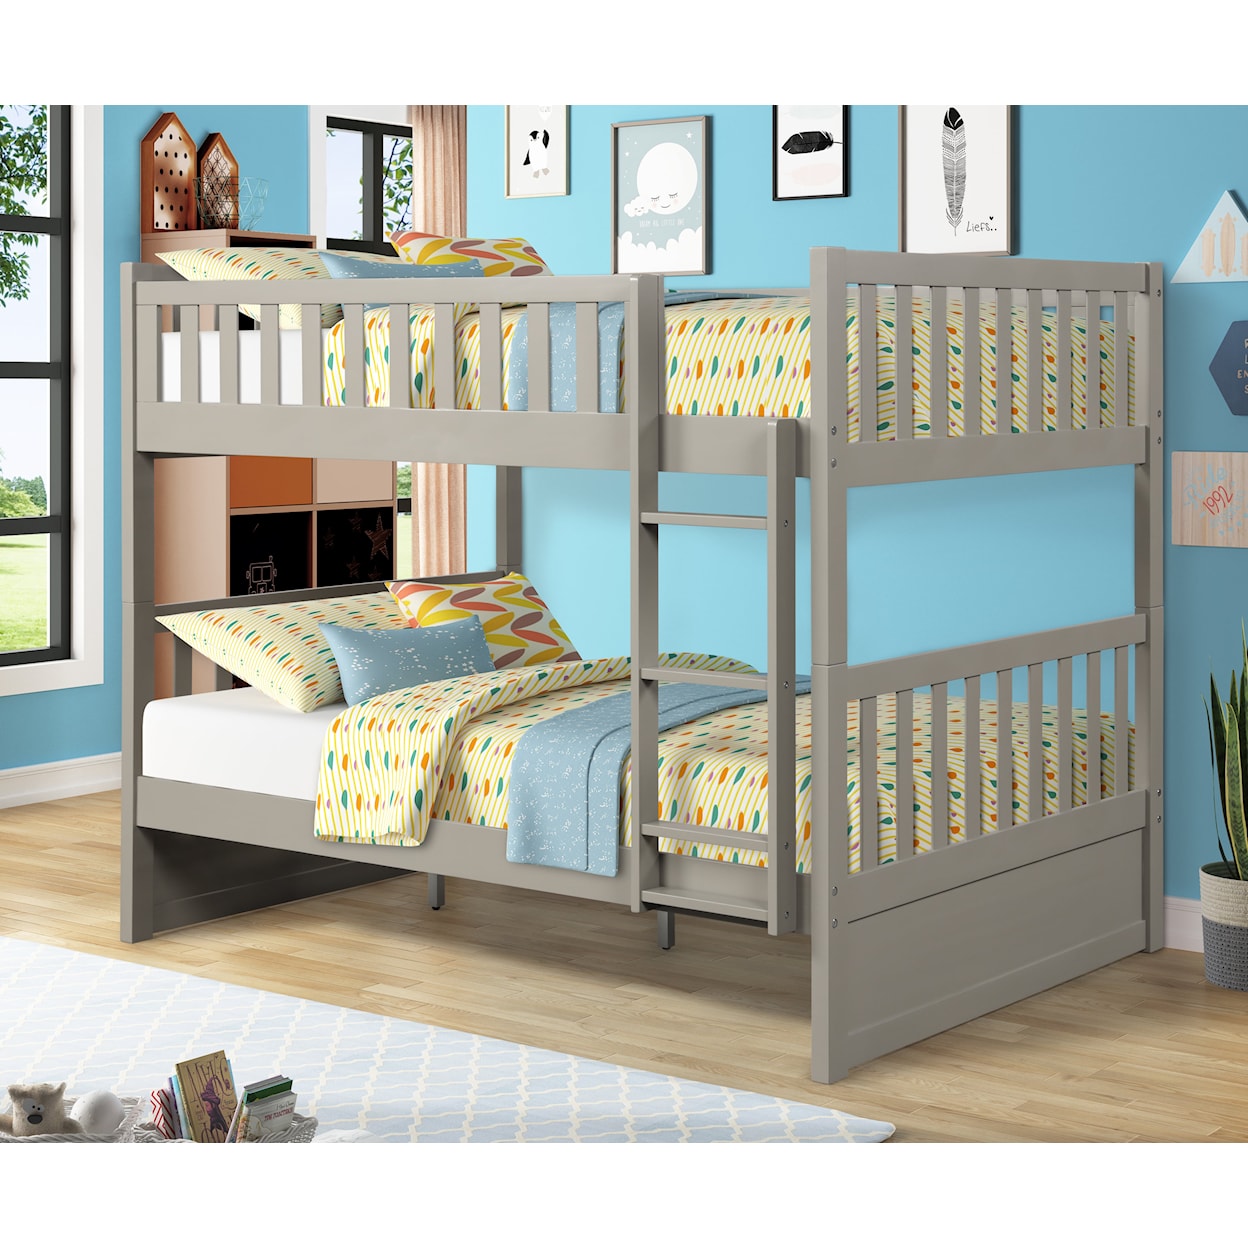 Alex's Furniture B833G Casual Full Over Full Bunk Bed